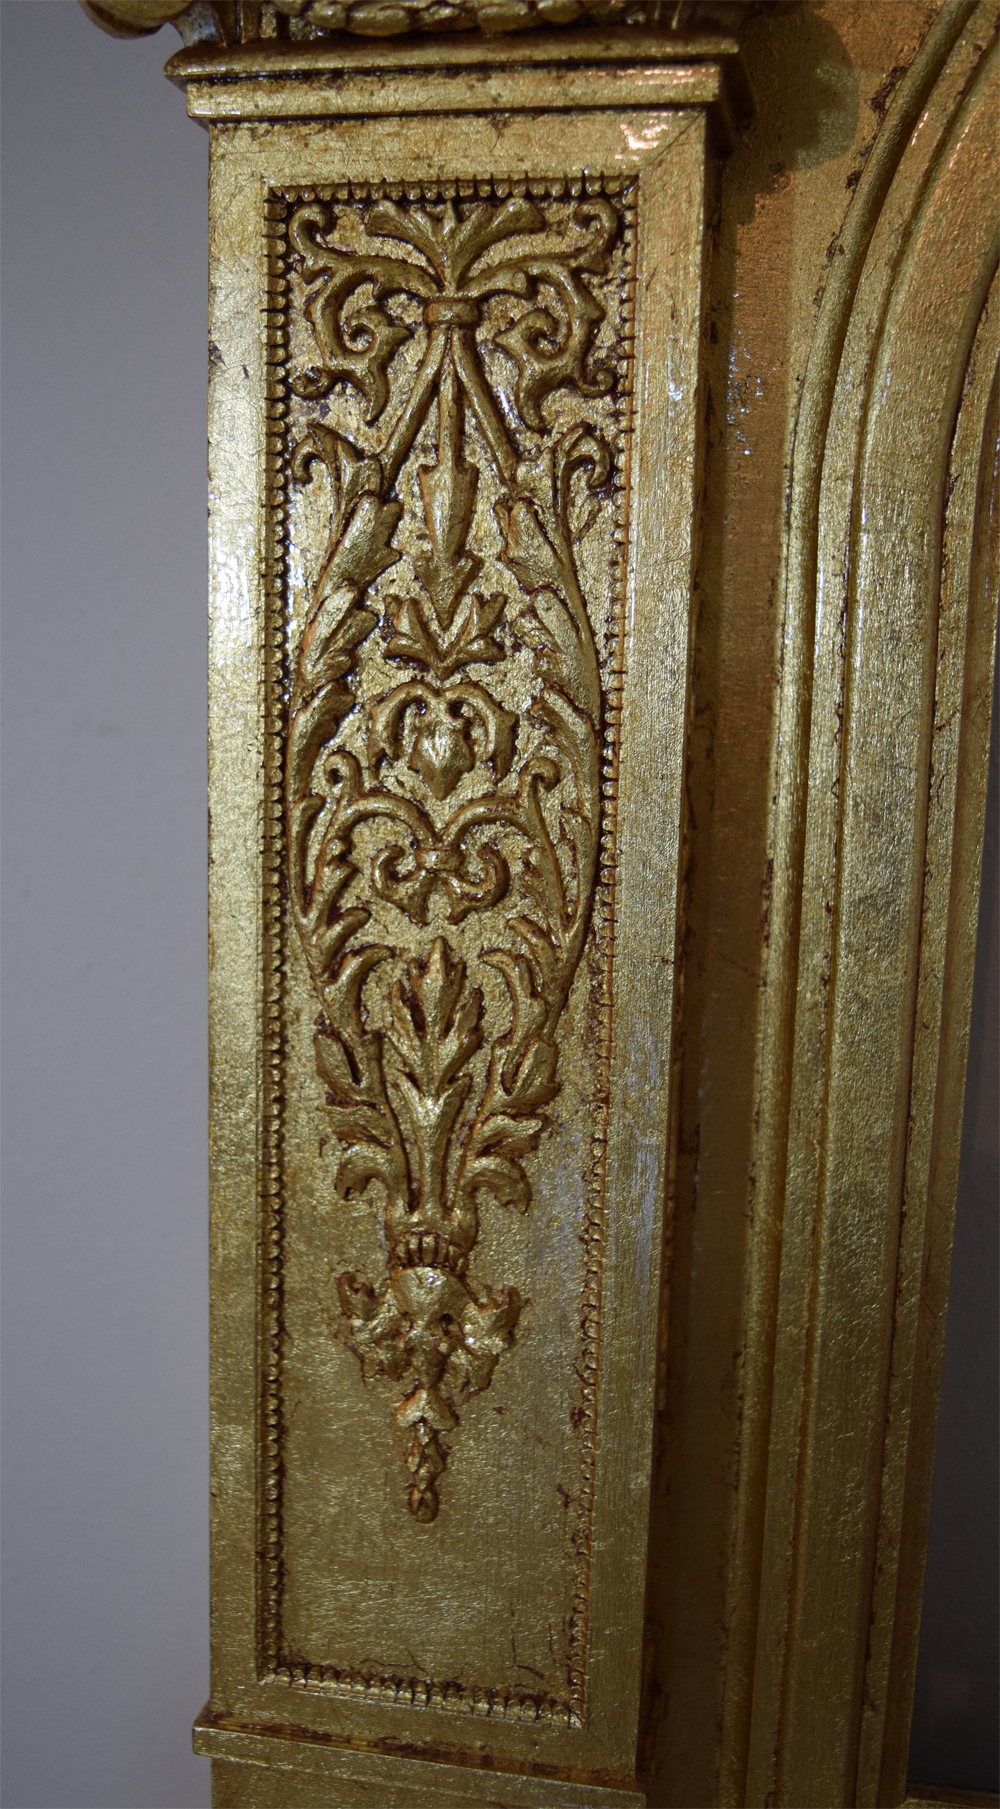  Detail of the front panel ornament. 